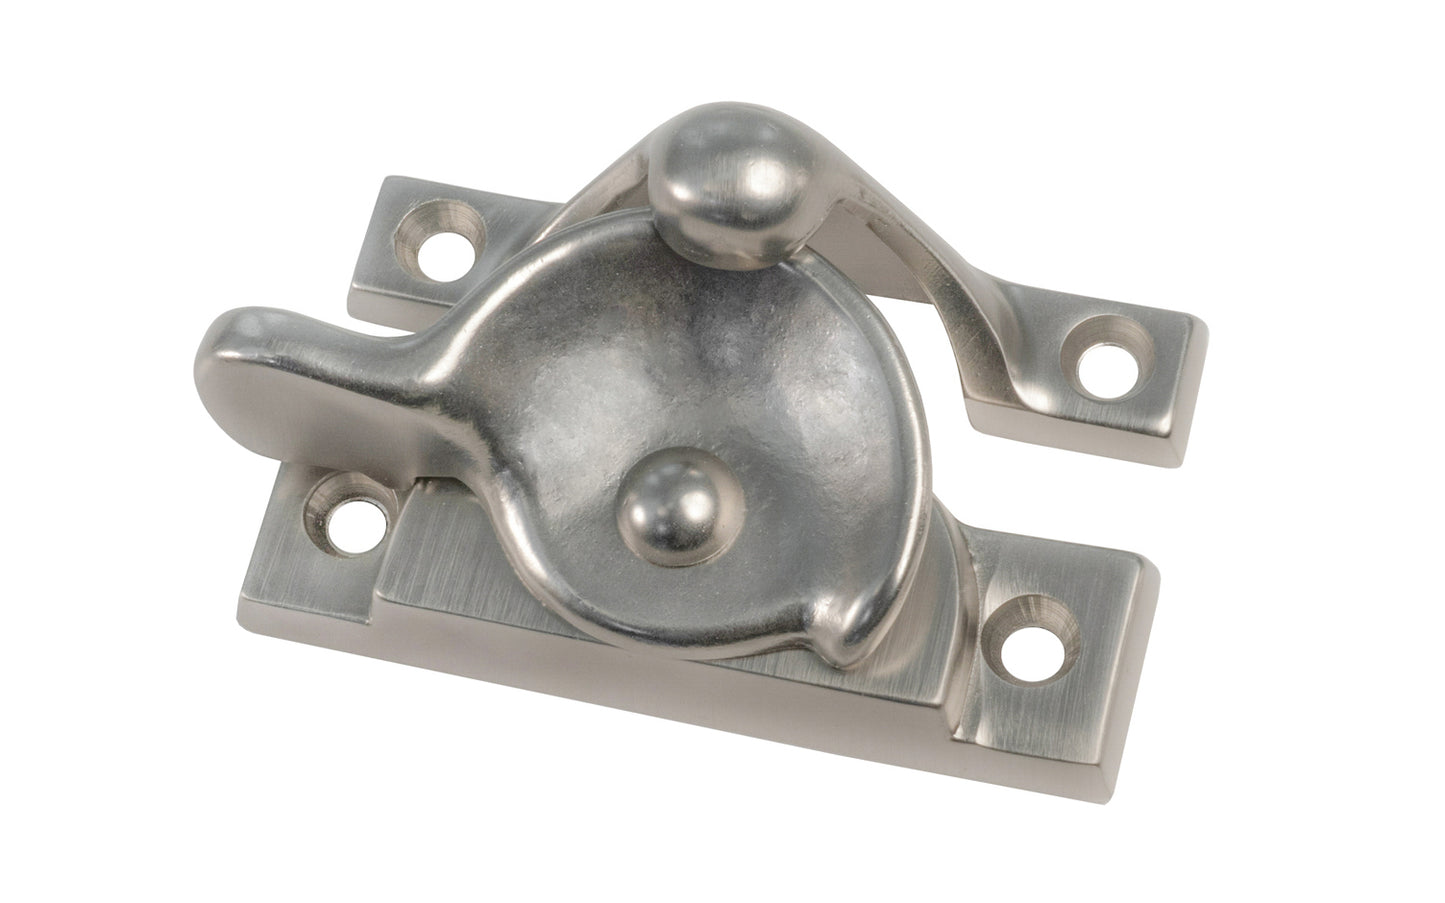 High quality classic solid brass crescent-style sash lock with square corners designed for hung or sash windows. Solid brass material with a durable pivot turn. 2-1/2" x 1" Size Lock. Brushed Nickel Finish.